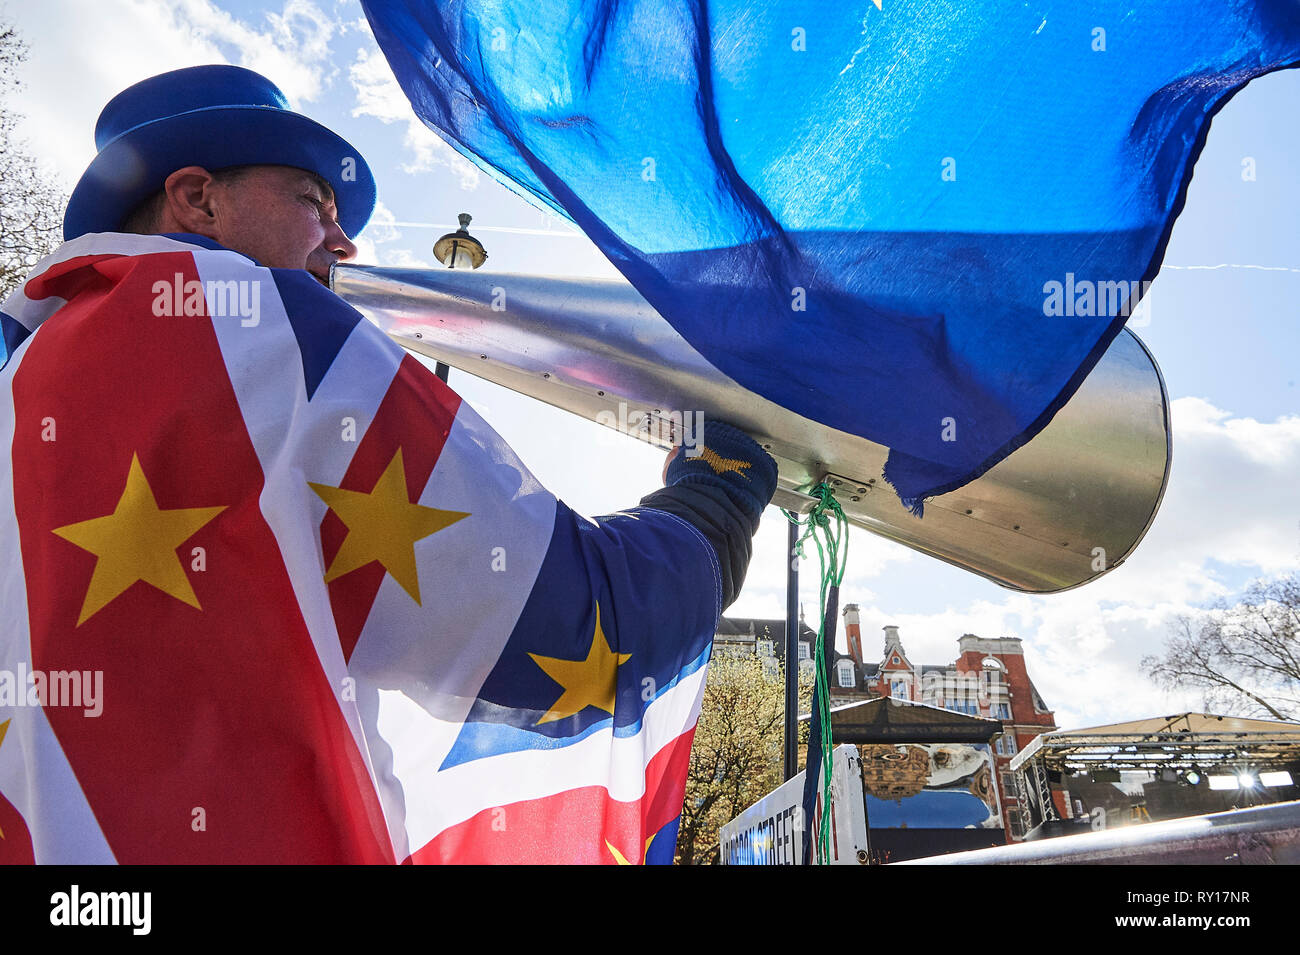 London, UK. 11th March 2019. Streven Bray, Pro remain campaigner, enjoy the sun outside Parliament. Credit: Thomas Bowles/Alamy Live News Stock Photo